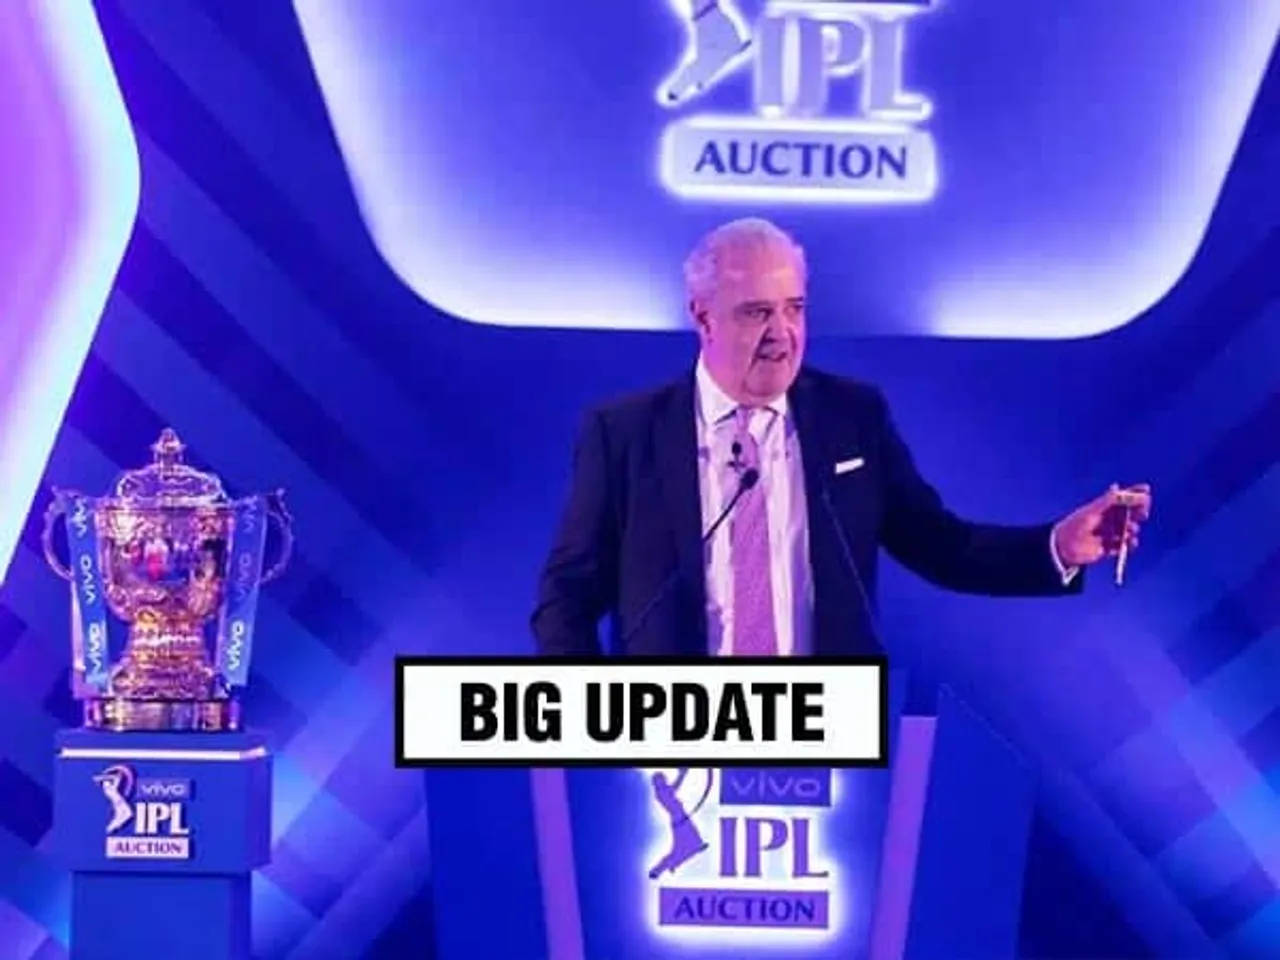 Why IPL Auction Interrupted